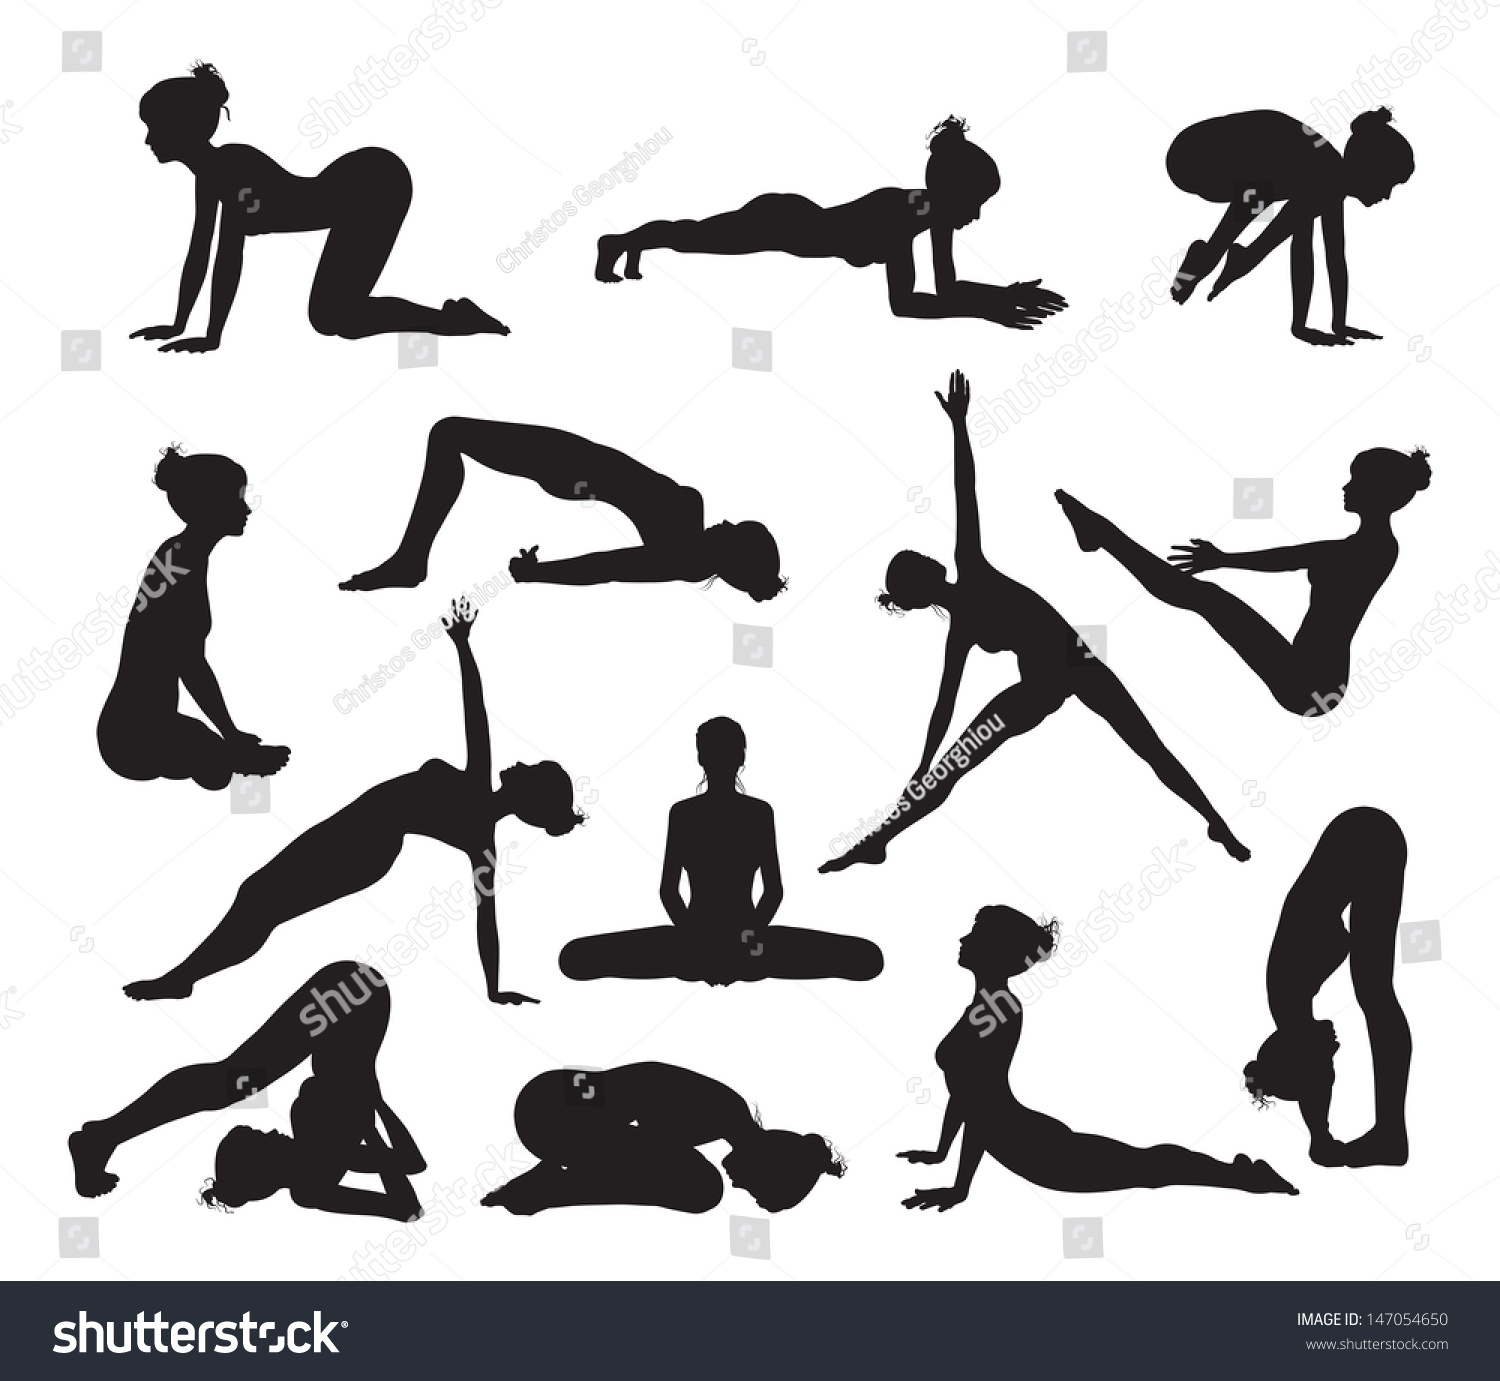 SVG of Silhouettes of a woman doing yoga exercises. High quality and high detail svg